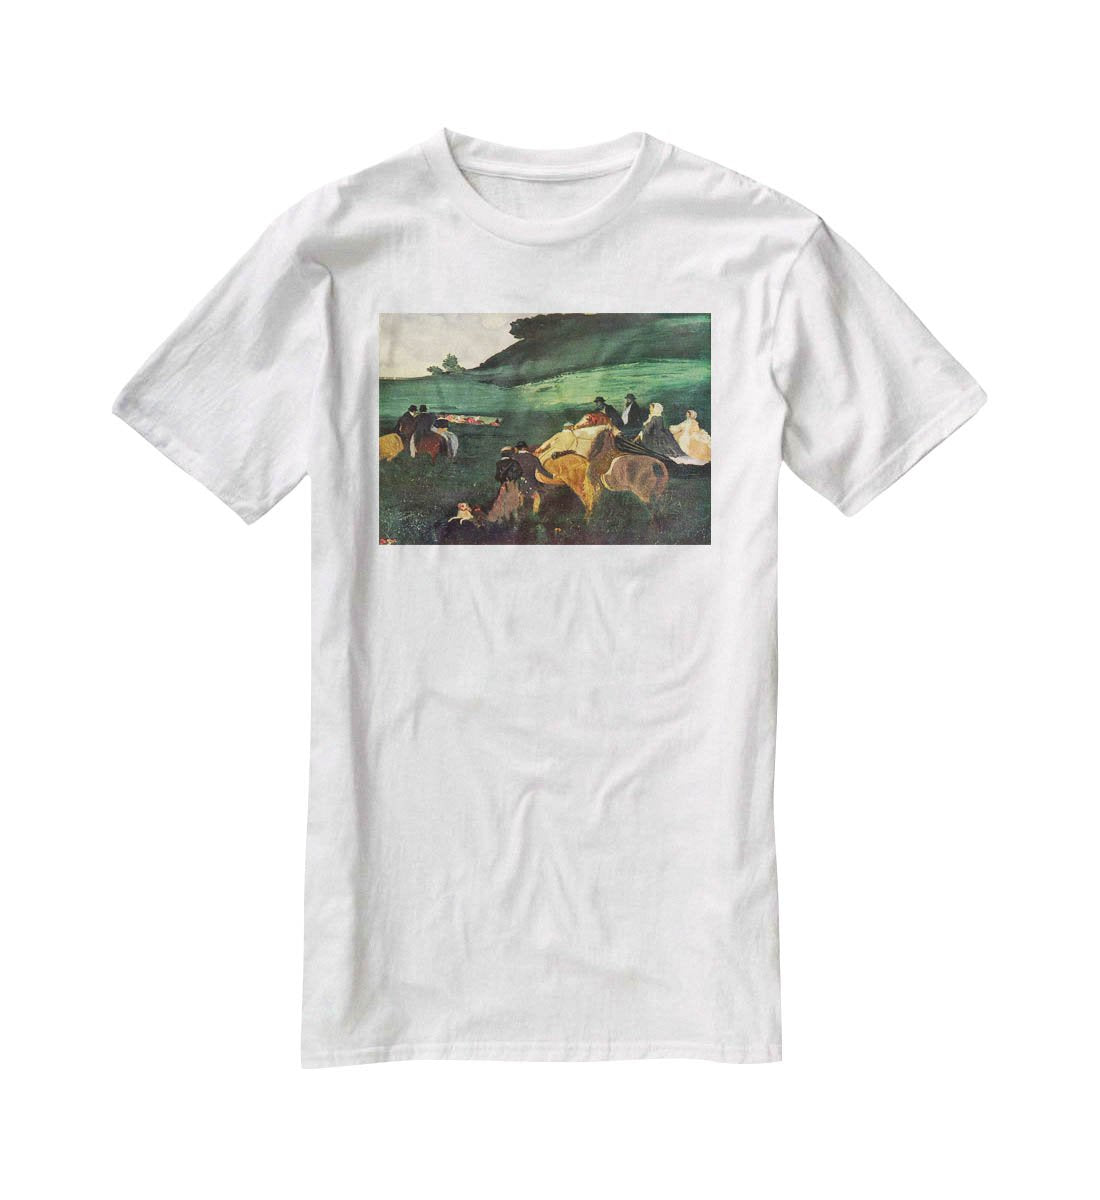 Riders in the landscape by Degas T-Shirt - Canvas Art Rocks - 5